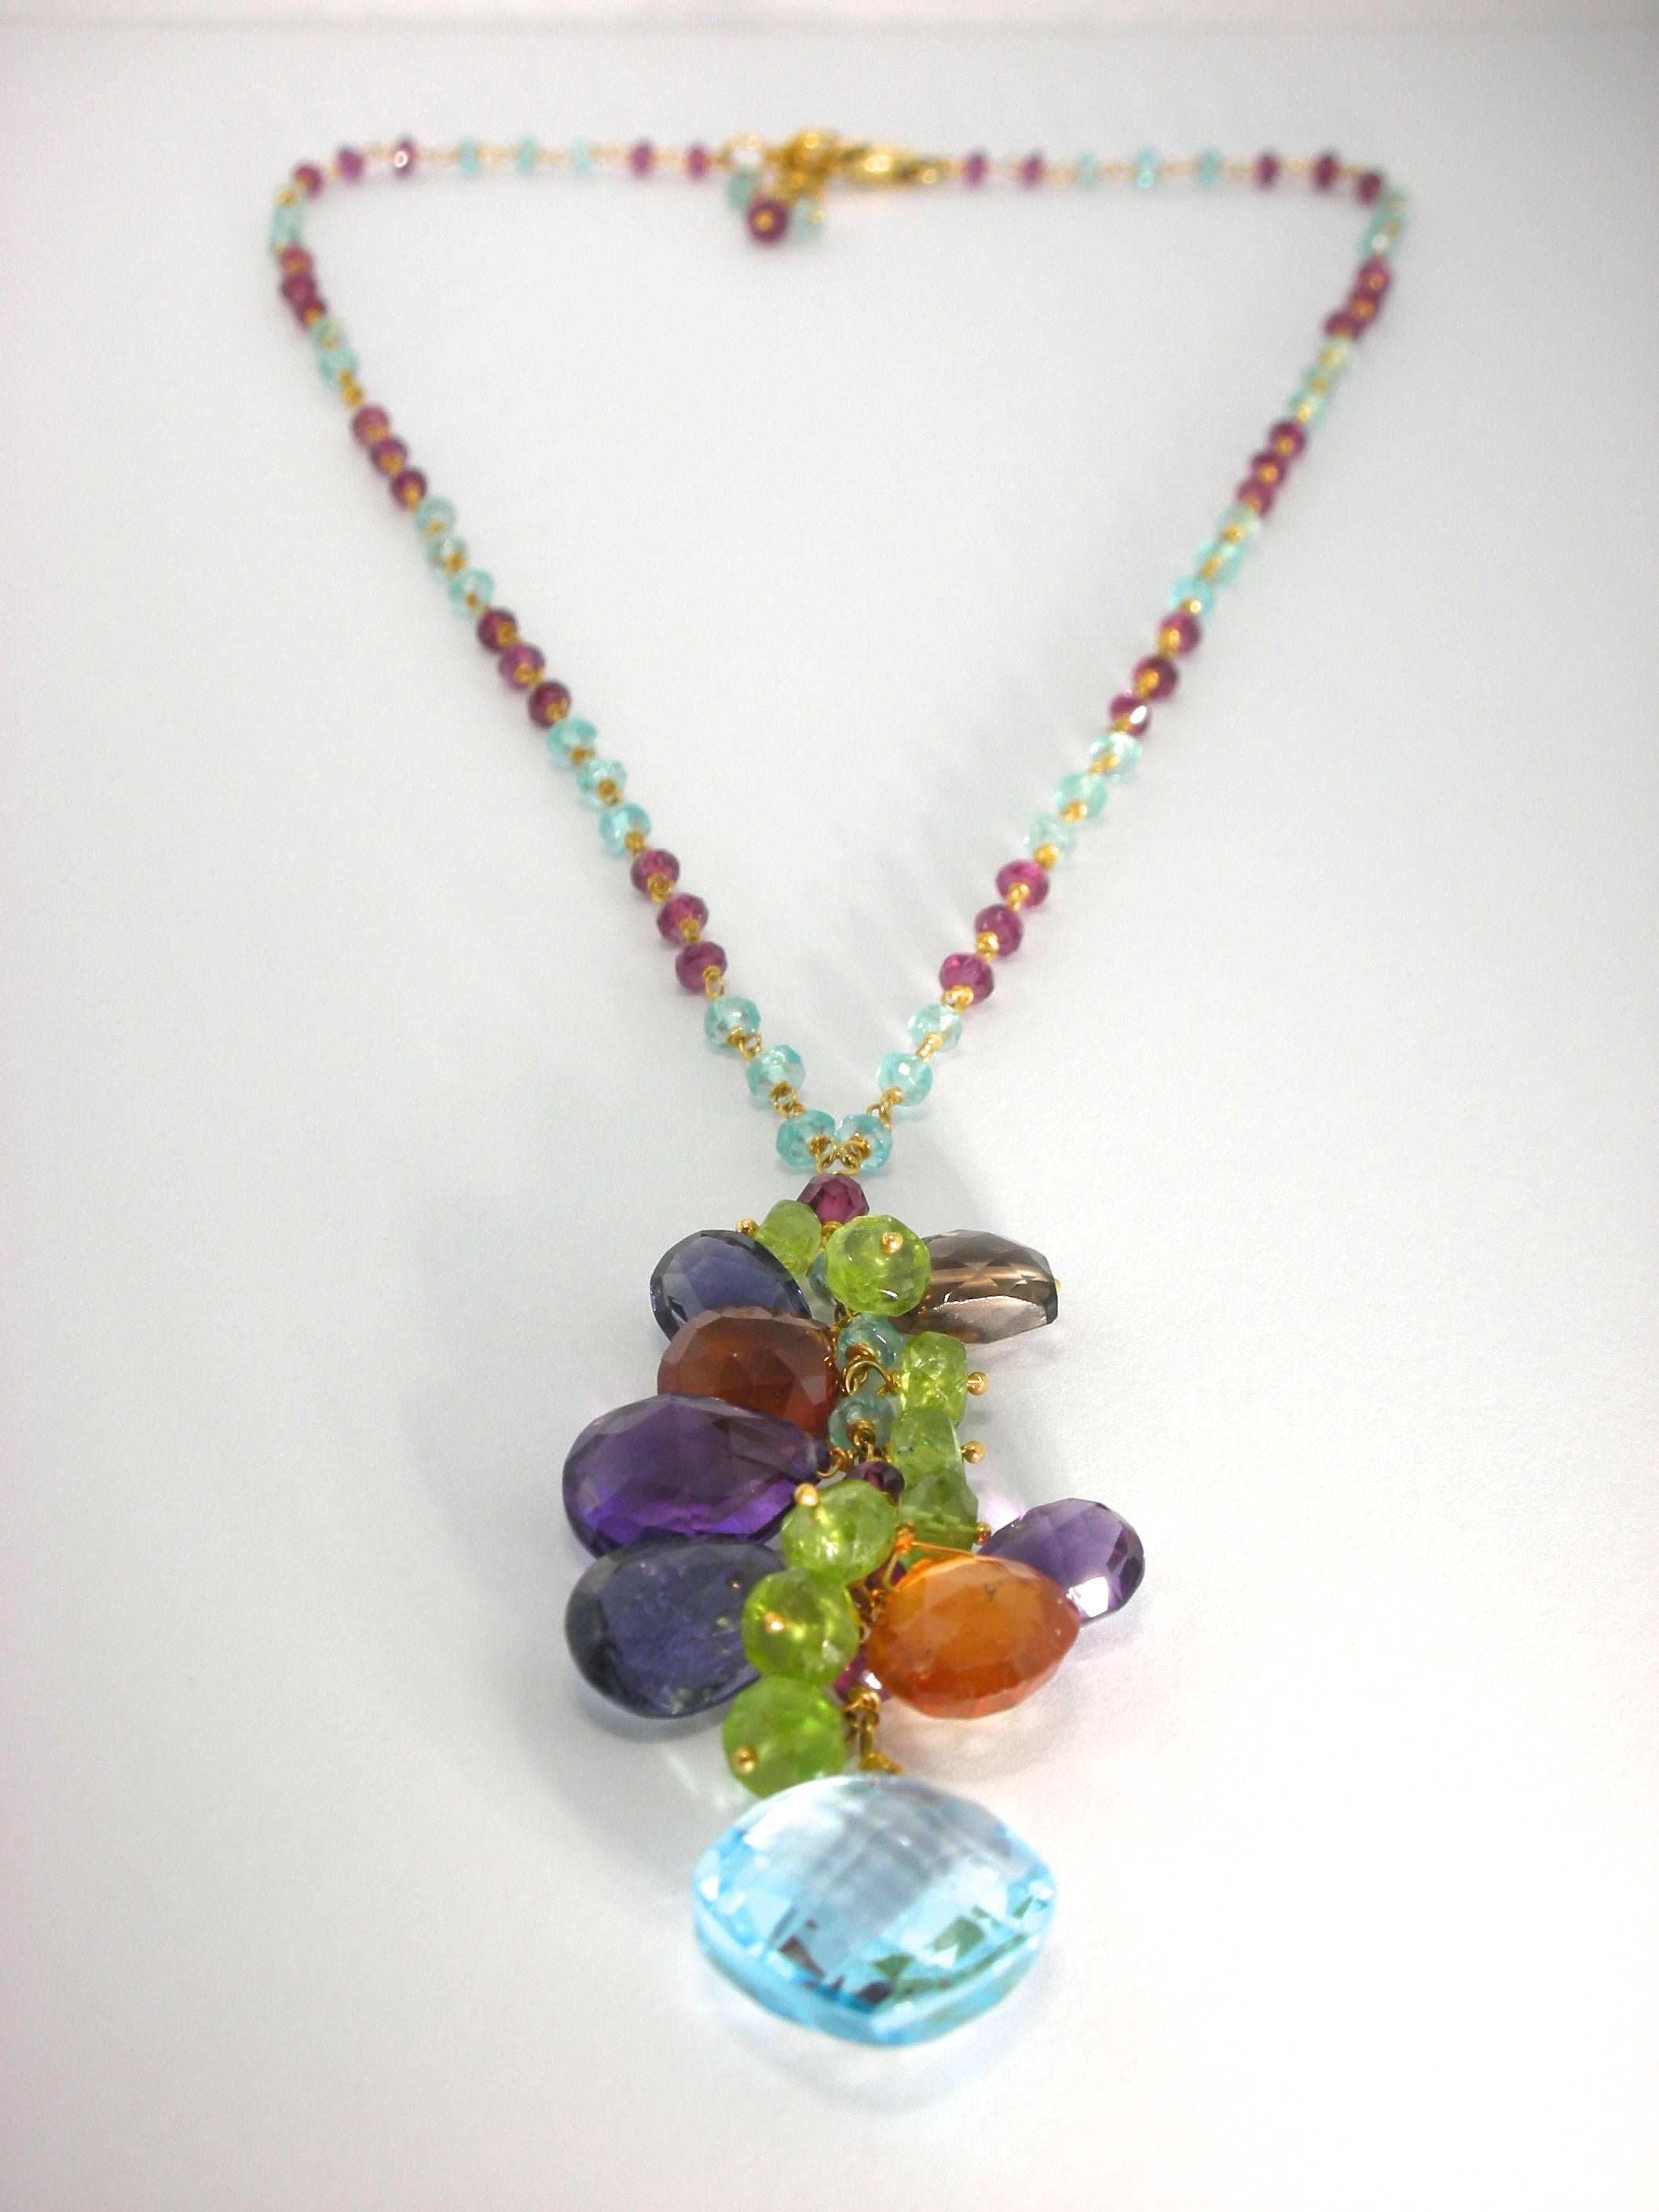 Jona design collection, hand crafted, 18 karat yellow gold, Blue Topaz, Peridot, Carnelian, Iolite bead necklace (total carats 135.70).
All Jona jewelry is new and has never been previously owned or worn. Each item will arrive at your door